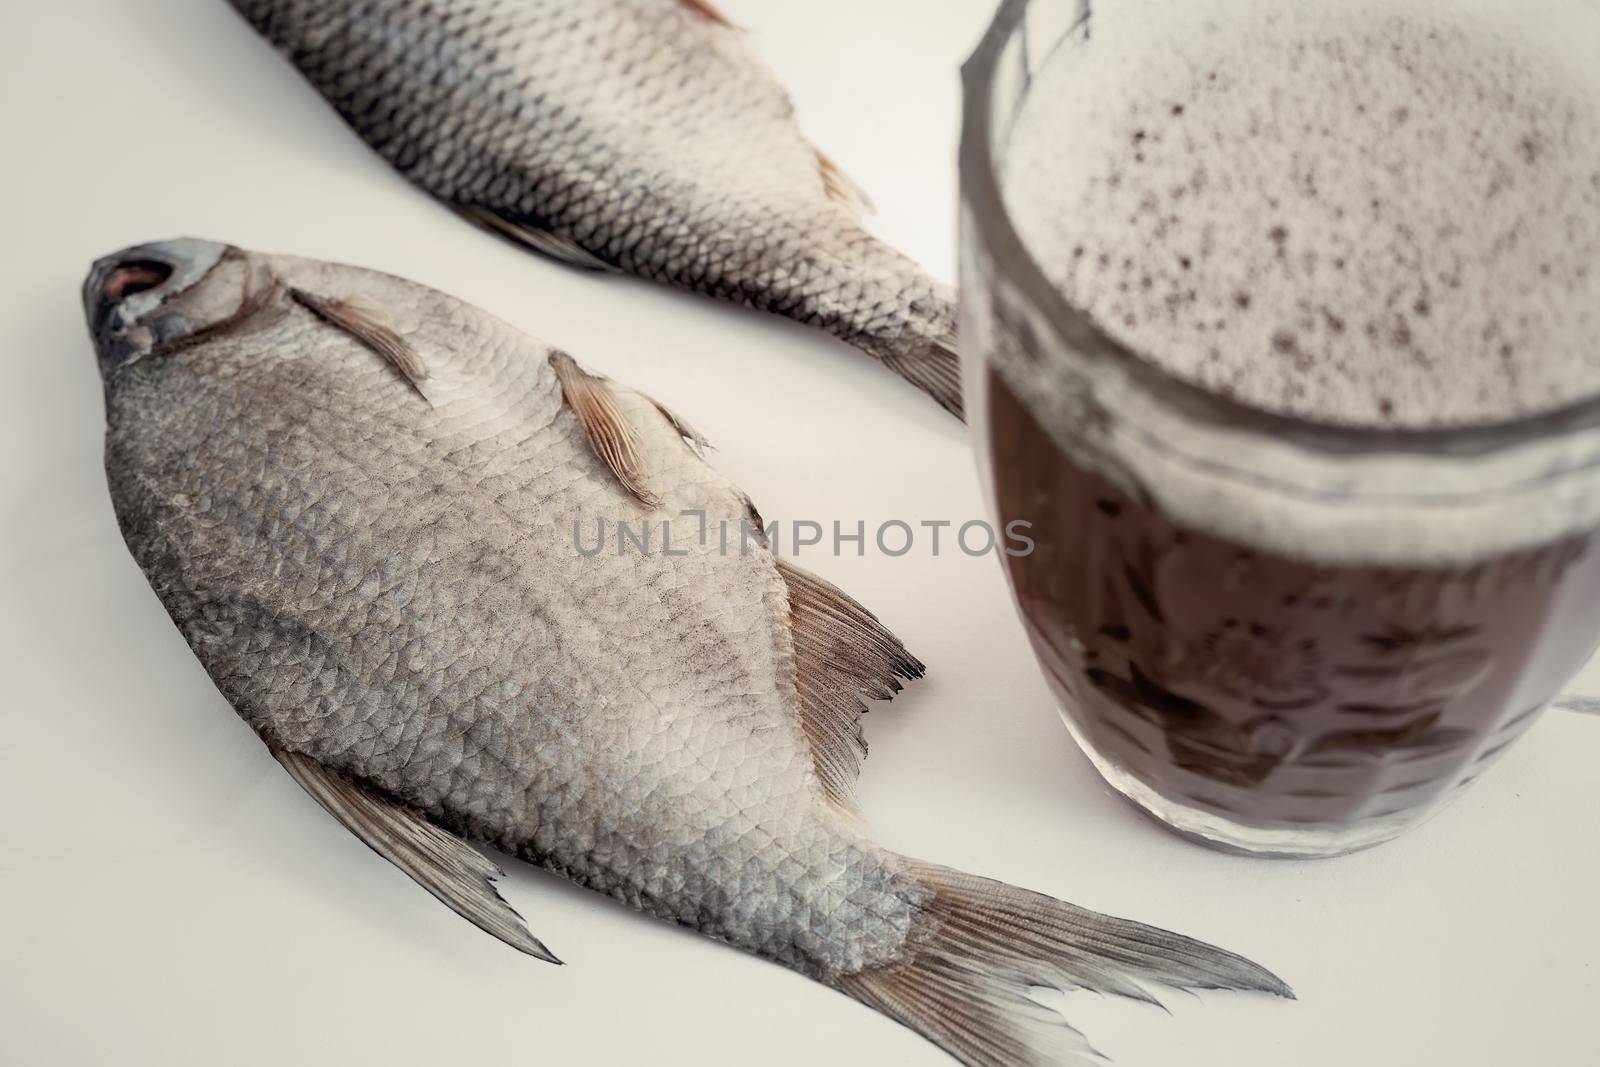 On the light surface of the table is dried fish, next to a glass of beer.